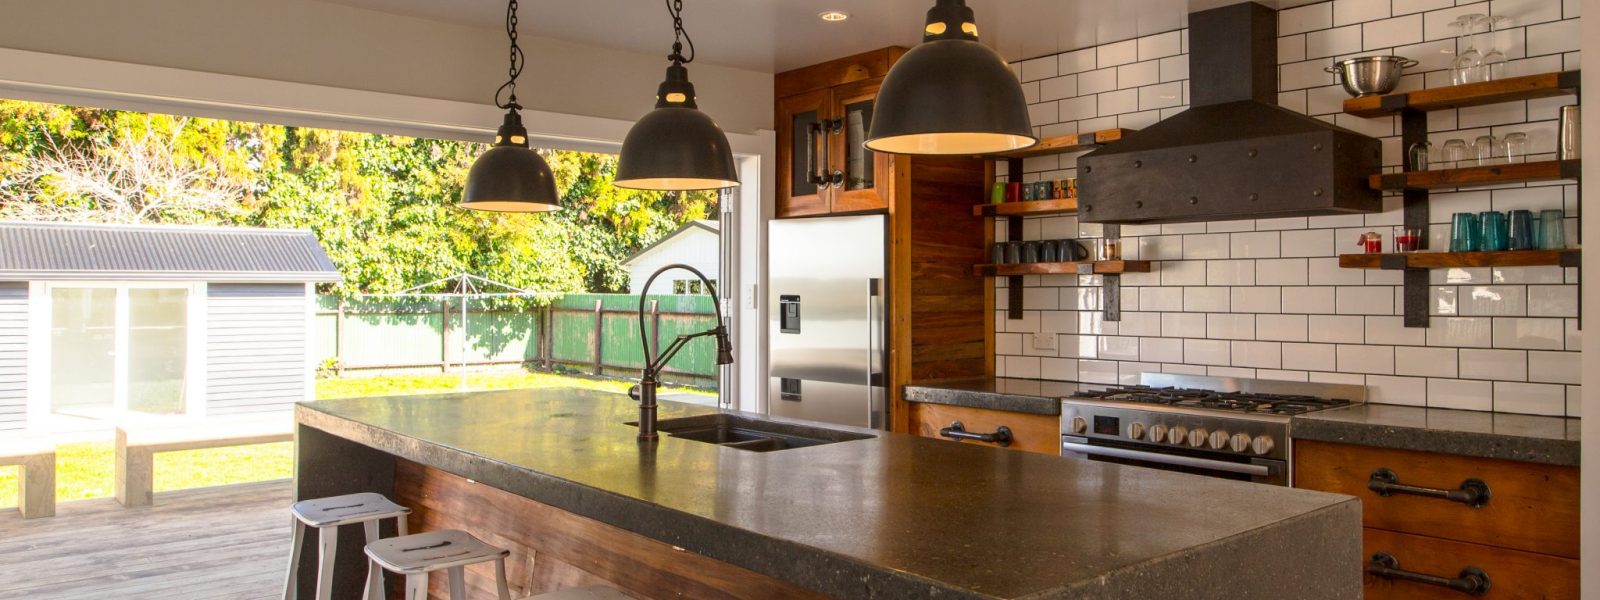 Shoemaker Road Industrial style kitchen using Rimu and Steel.